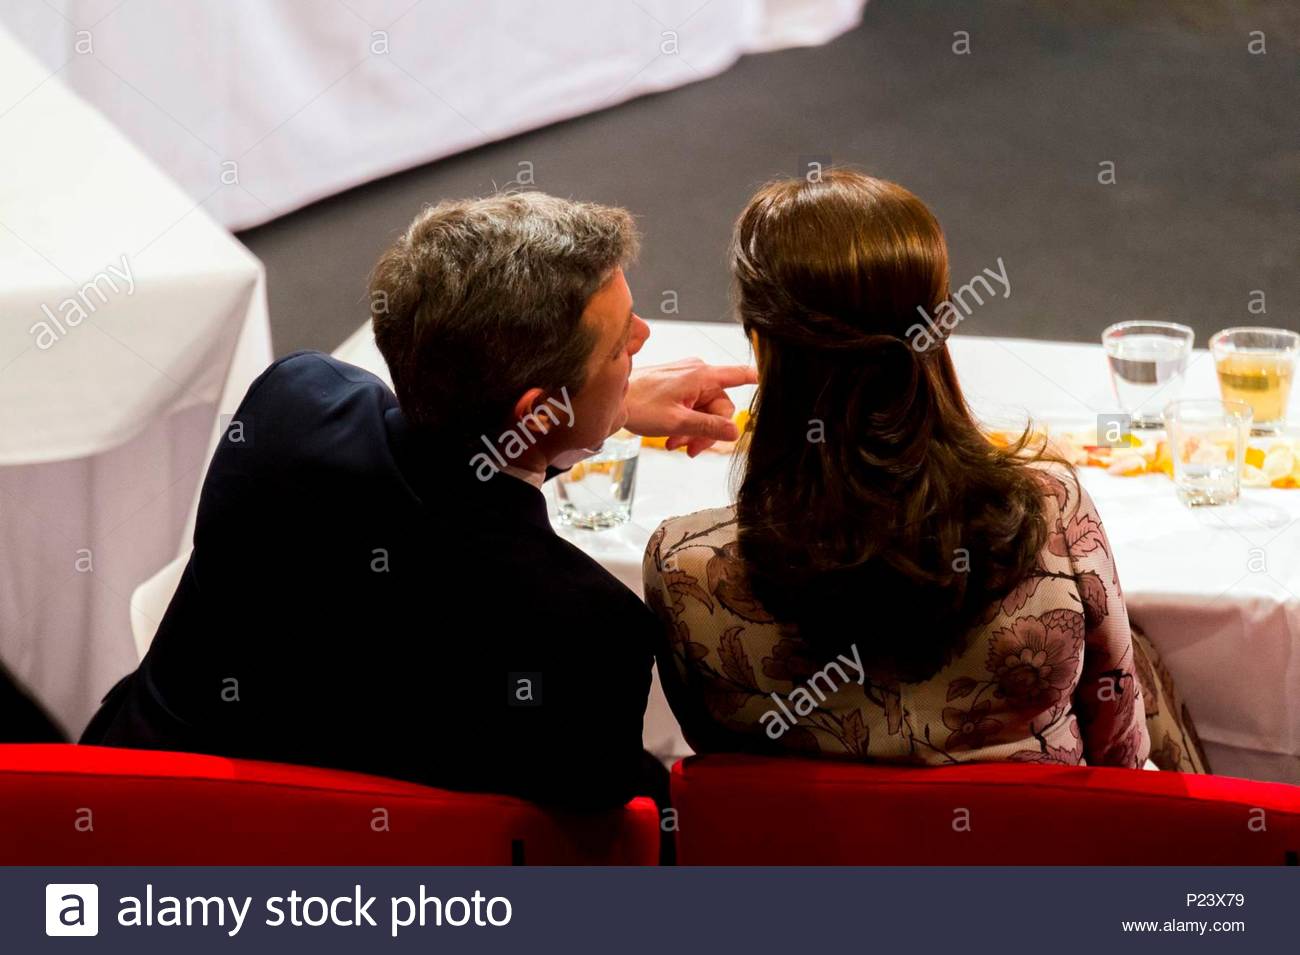 crown-prince-frederik-and-crown-princess-mary-the-danish-royal-family-queen-margrethe-crown-prince-frederik-crown-princess-mary-prince-joachim-princess-marie-and-princess-benedikte-celebrating-the-100-year-anniversary-of-the-constitution-by-attending-a-gala-show-in-tivoli-gardens-june-4-2015-code-07640jsu-photo-jesper-sunesenall-over-press-denmark-P23X79.jpg